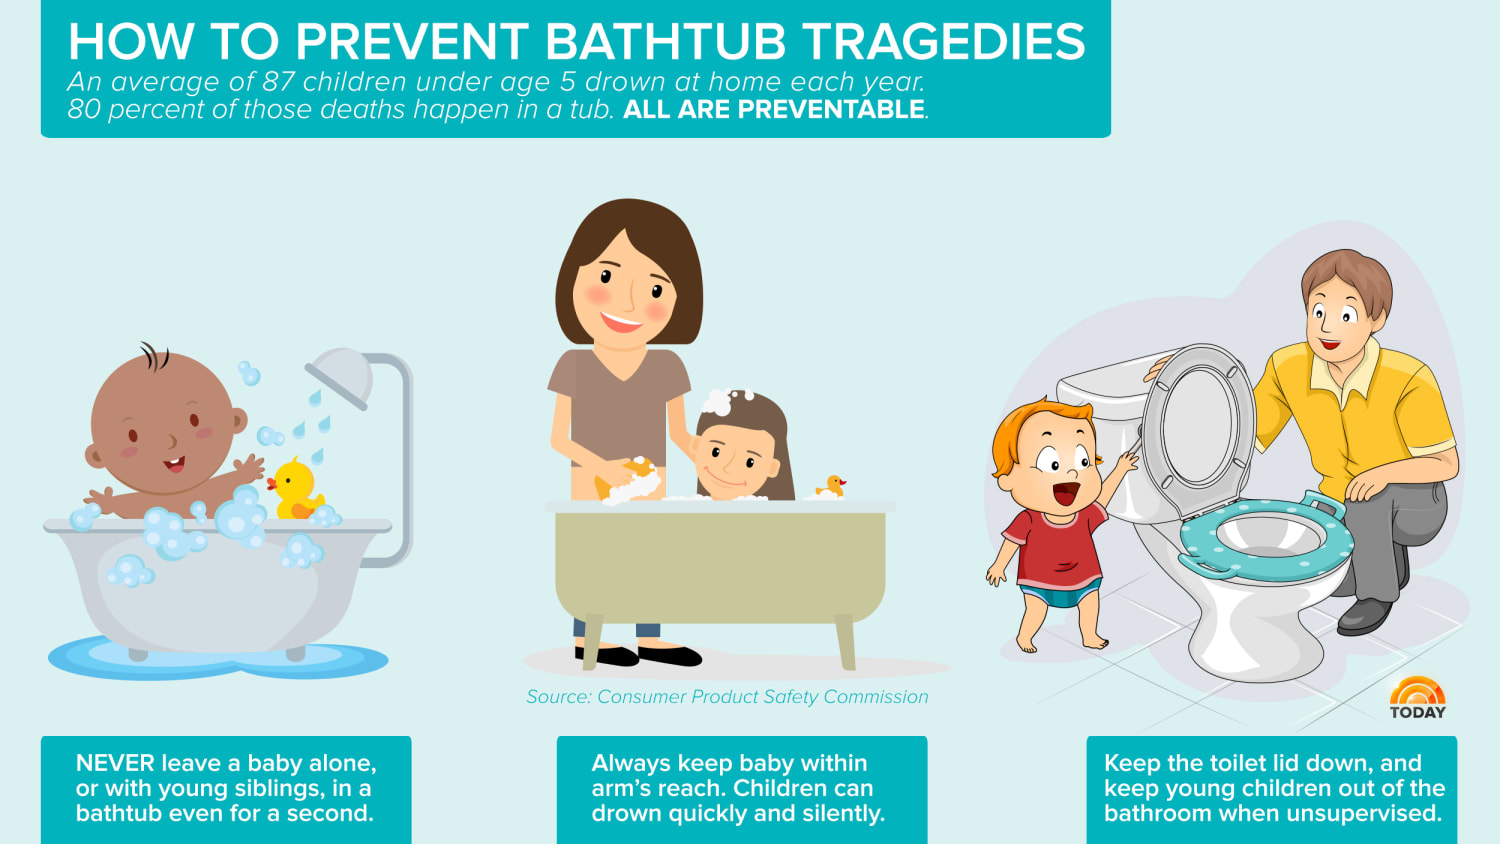 Tub Drownings Can Happen In Minutes, Bathtub Protection For Babies